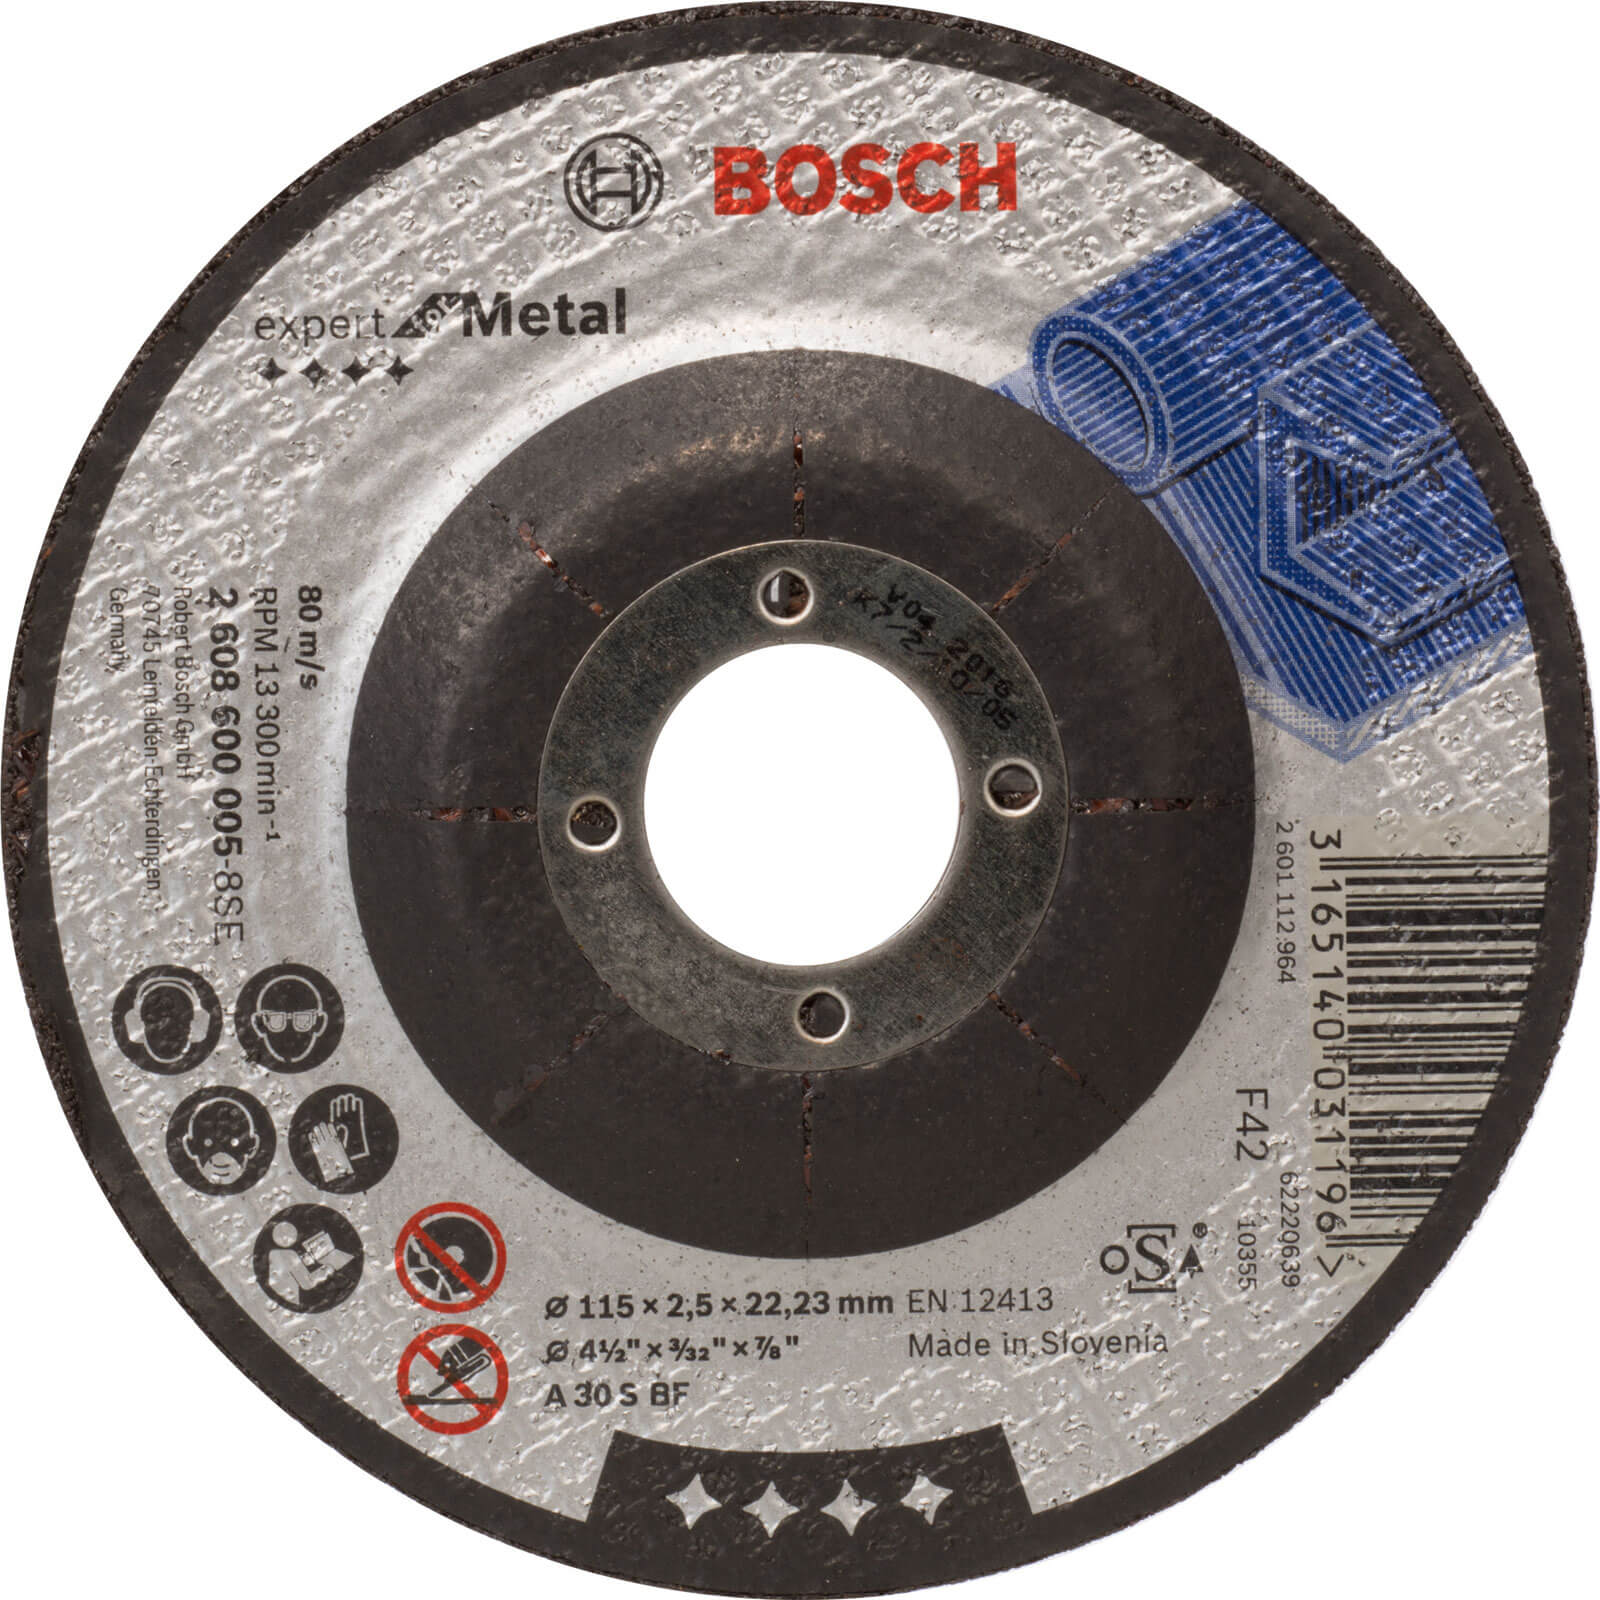 Photo of Bosch A30s Bf Depressed Centre Metal Cutting Disc 115mm